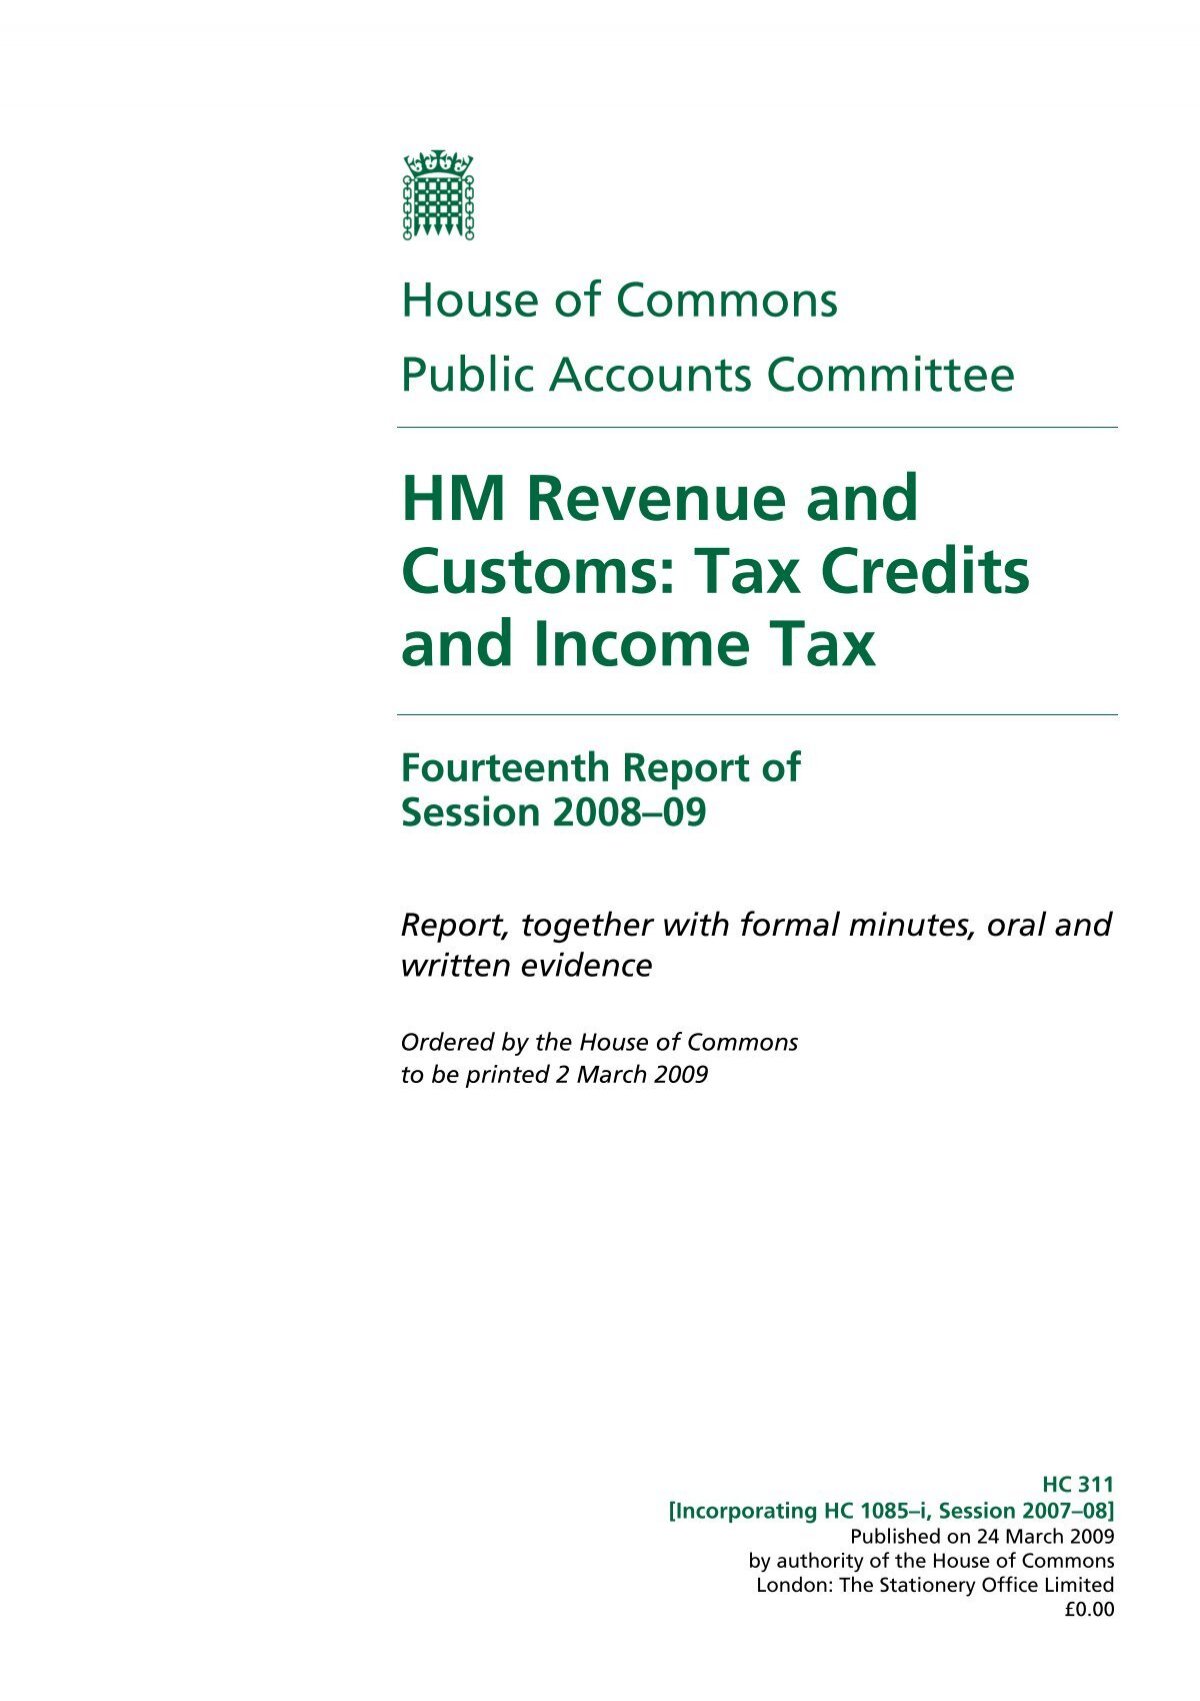 hm-revenue-and-customs-tax-credits-and-revenue-benefits